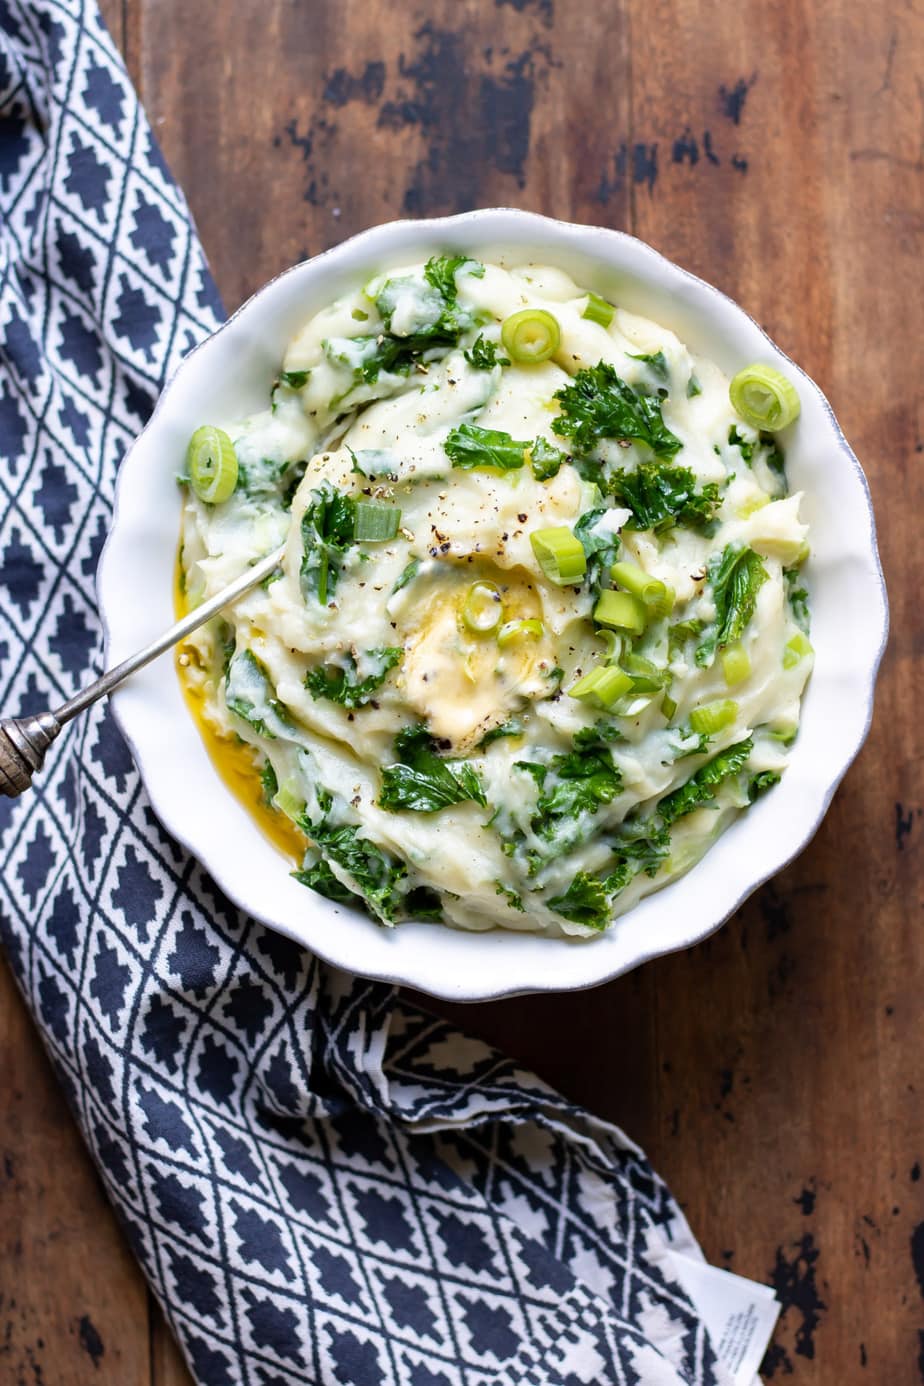 Dish of Irish colcannon with kale and butter melting on top.